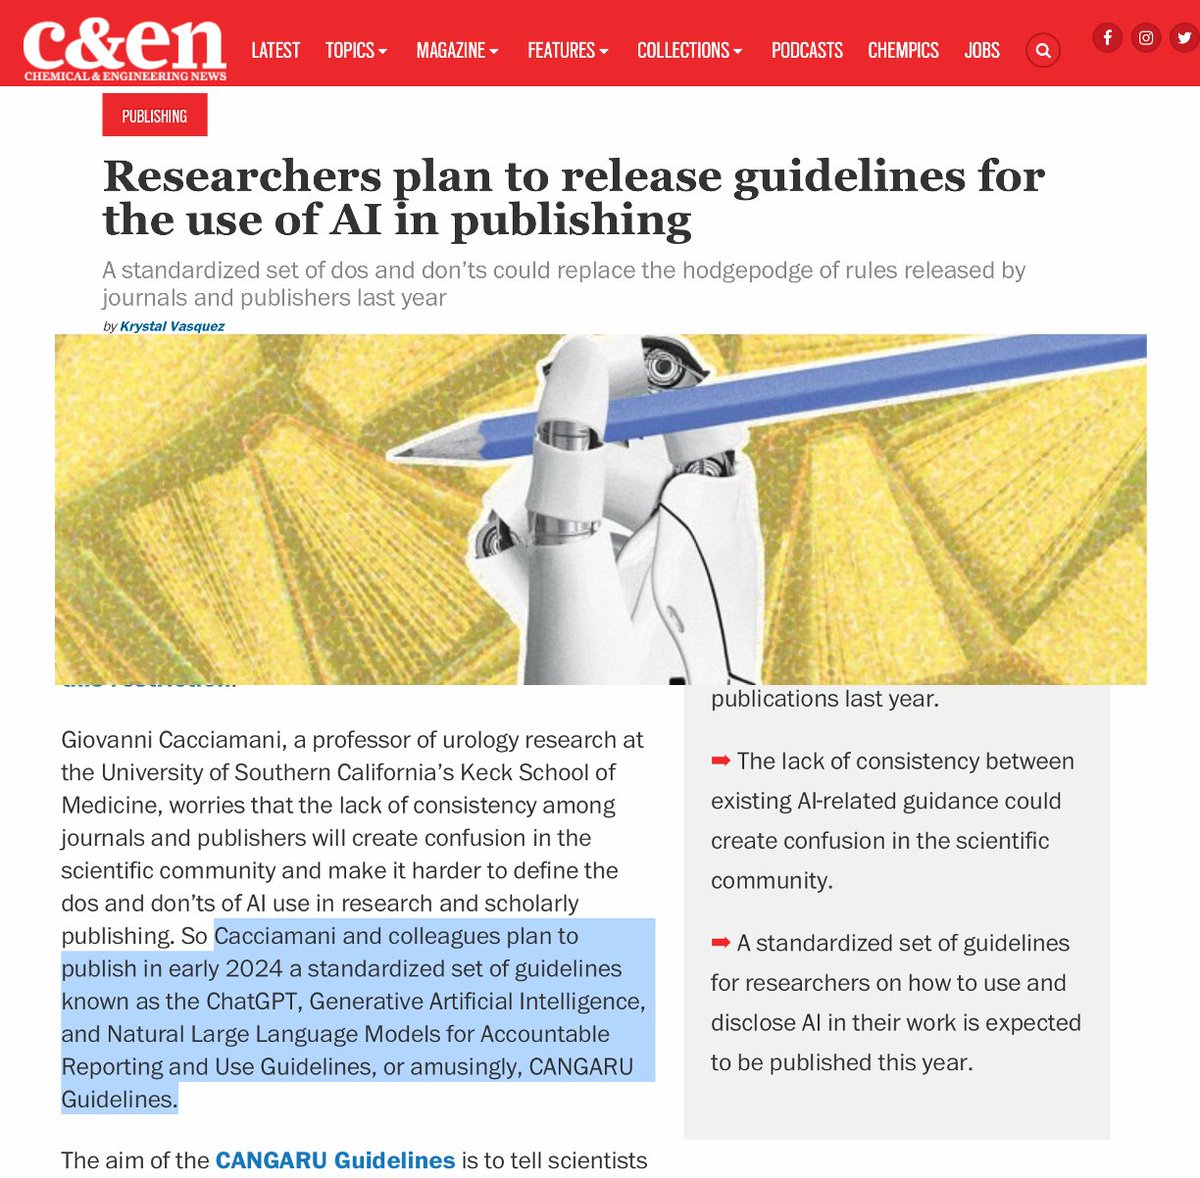 Thanks to Chemical & Engineer News for featuring and highlighting the #CANGARU initiative. 9,000 academics and researchers have already signed up to be part of this consensus! 'Researchers plan to release guidelines for the use of AI in publishing.' cen.acs.org/policy/publish…